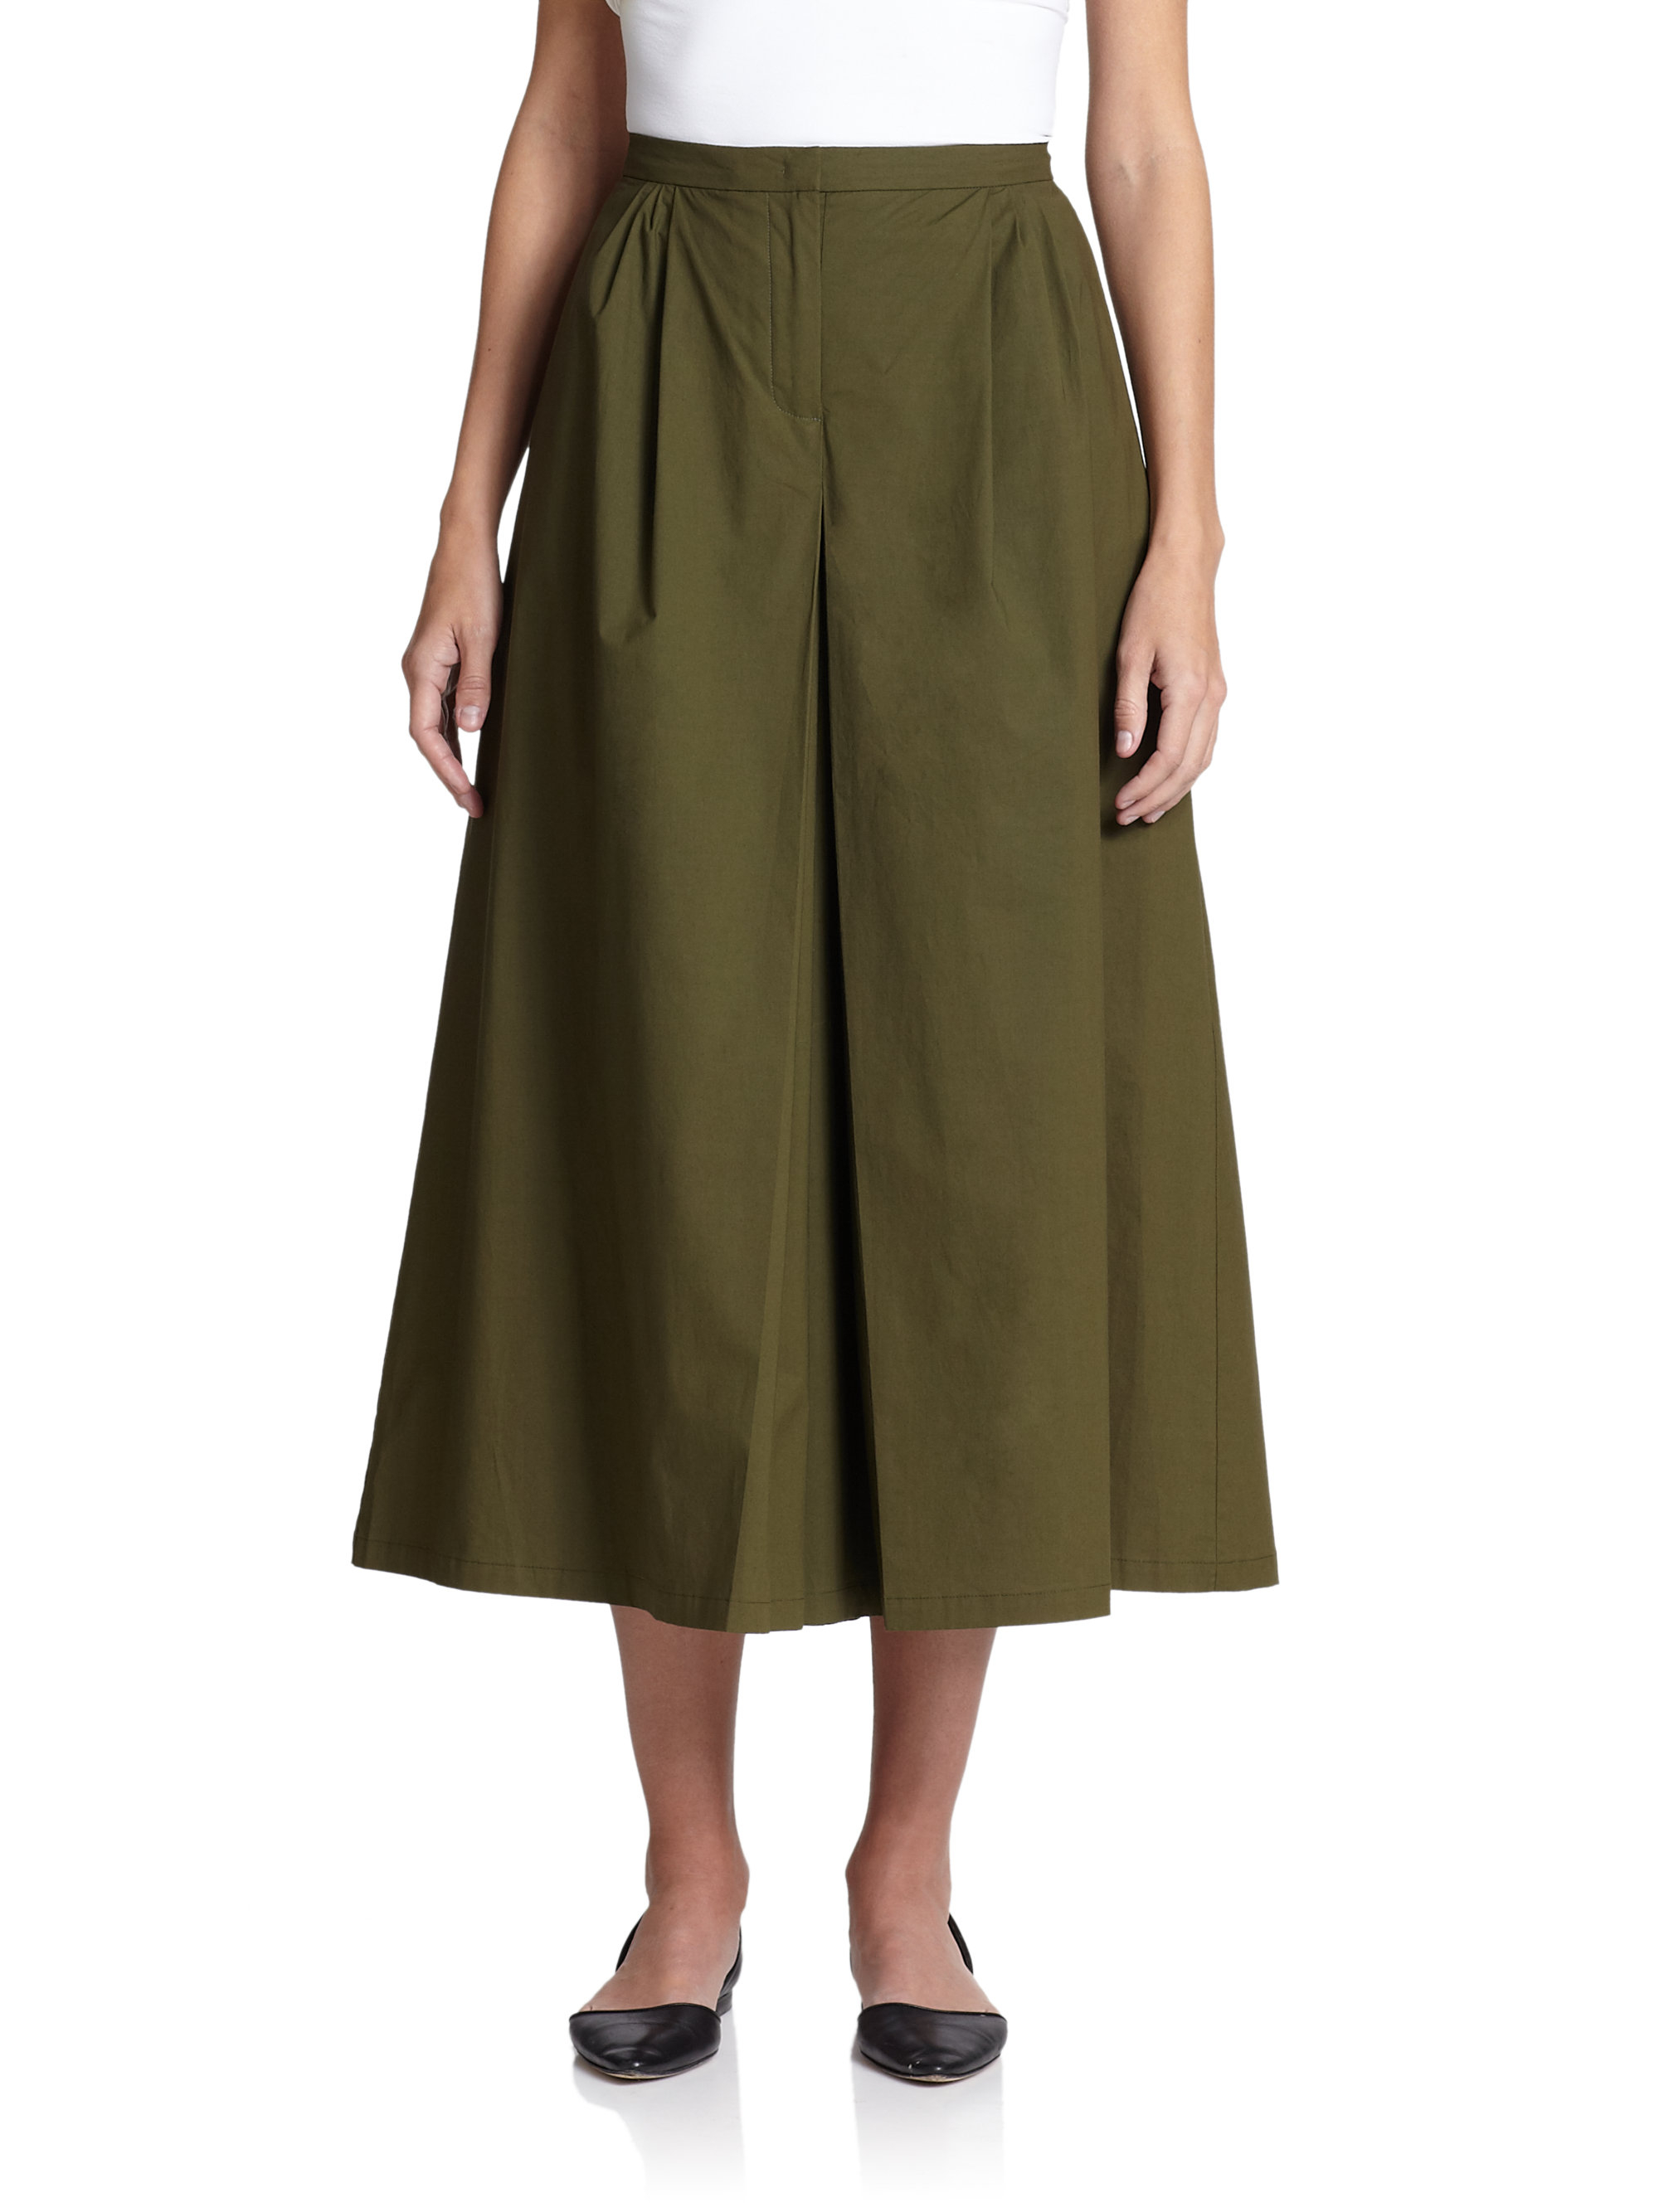 Lyst - Piazza Sempione Wide Leg Stretch-Cotton Skirt Pants in Green